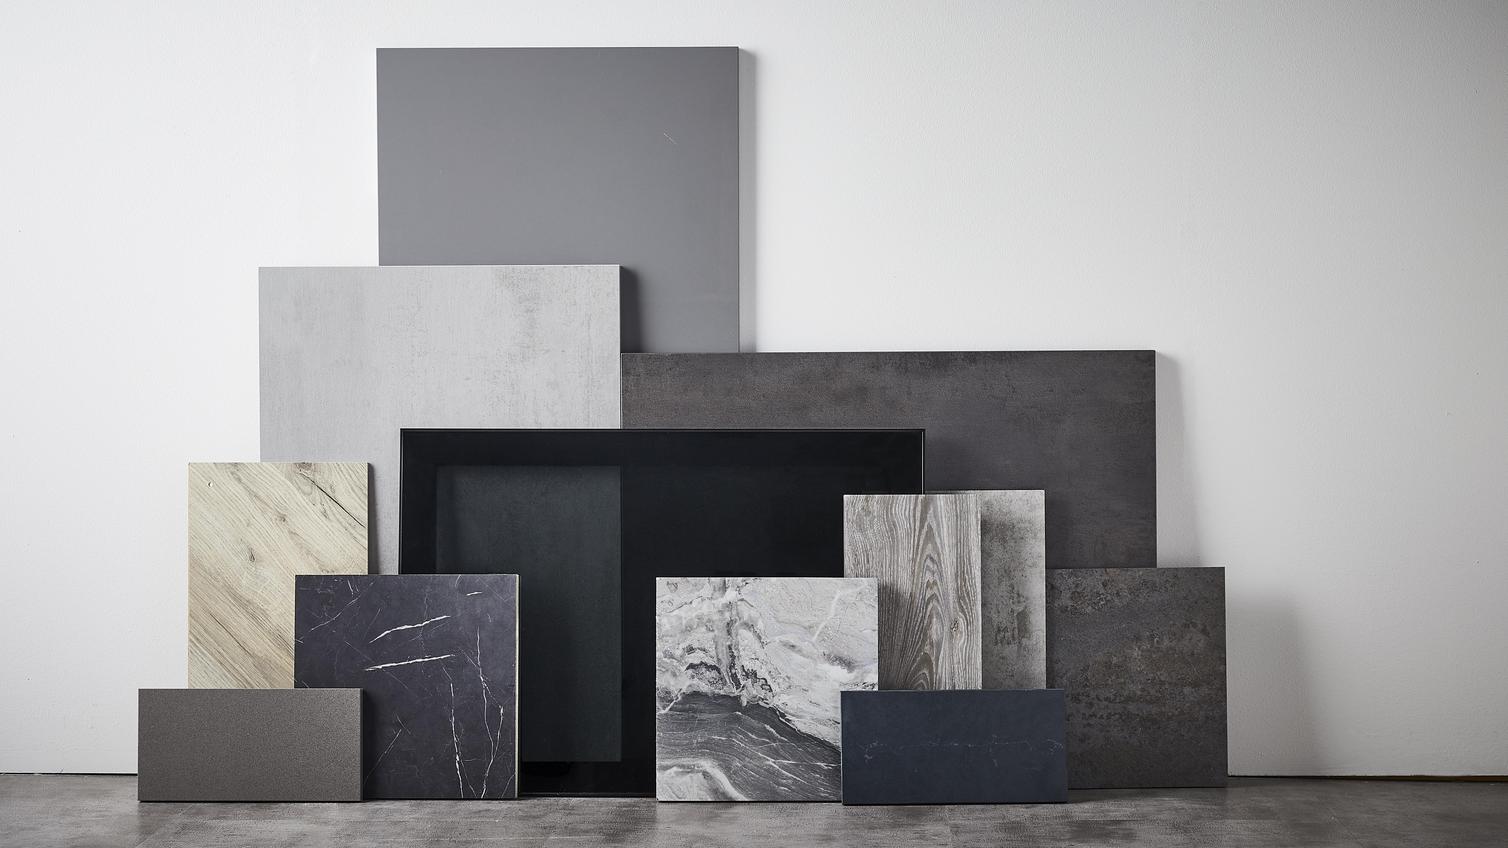 Sensory delight flat lay showing different square and rectangular slabs of textured stone, marble, and black materials.